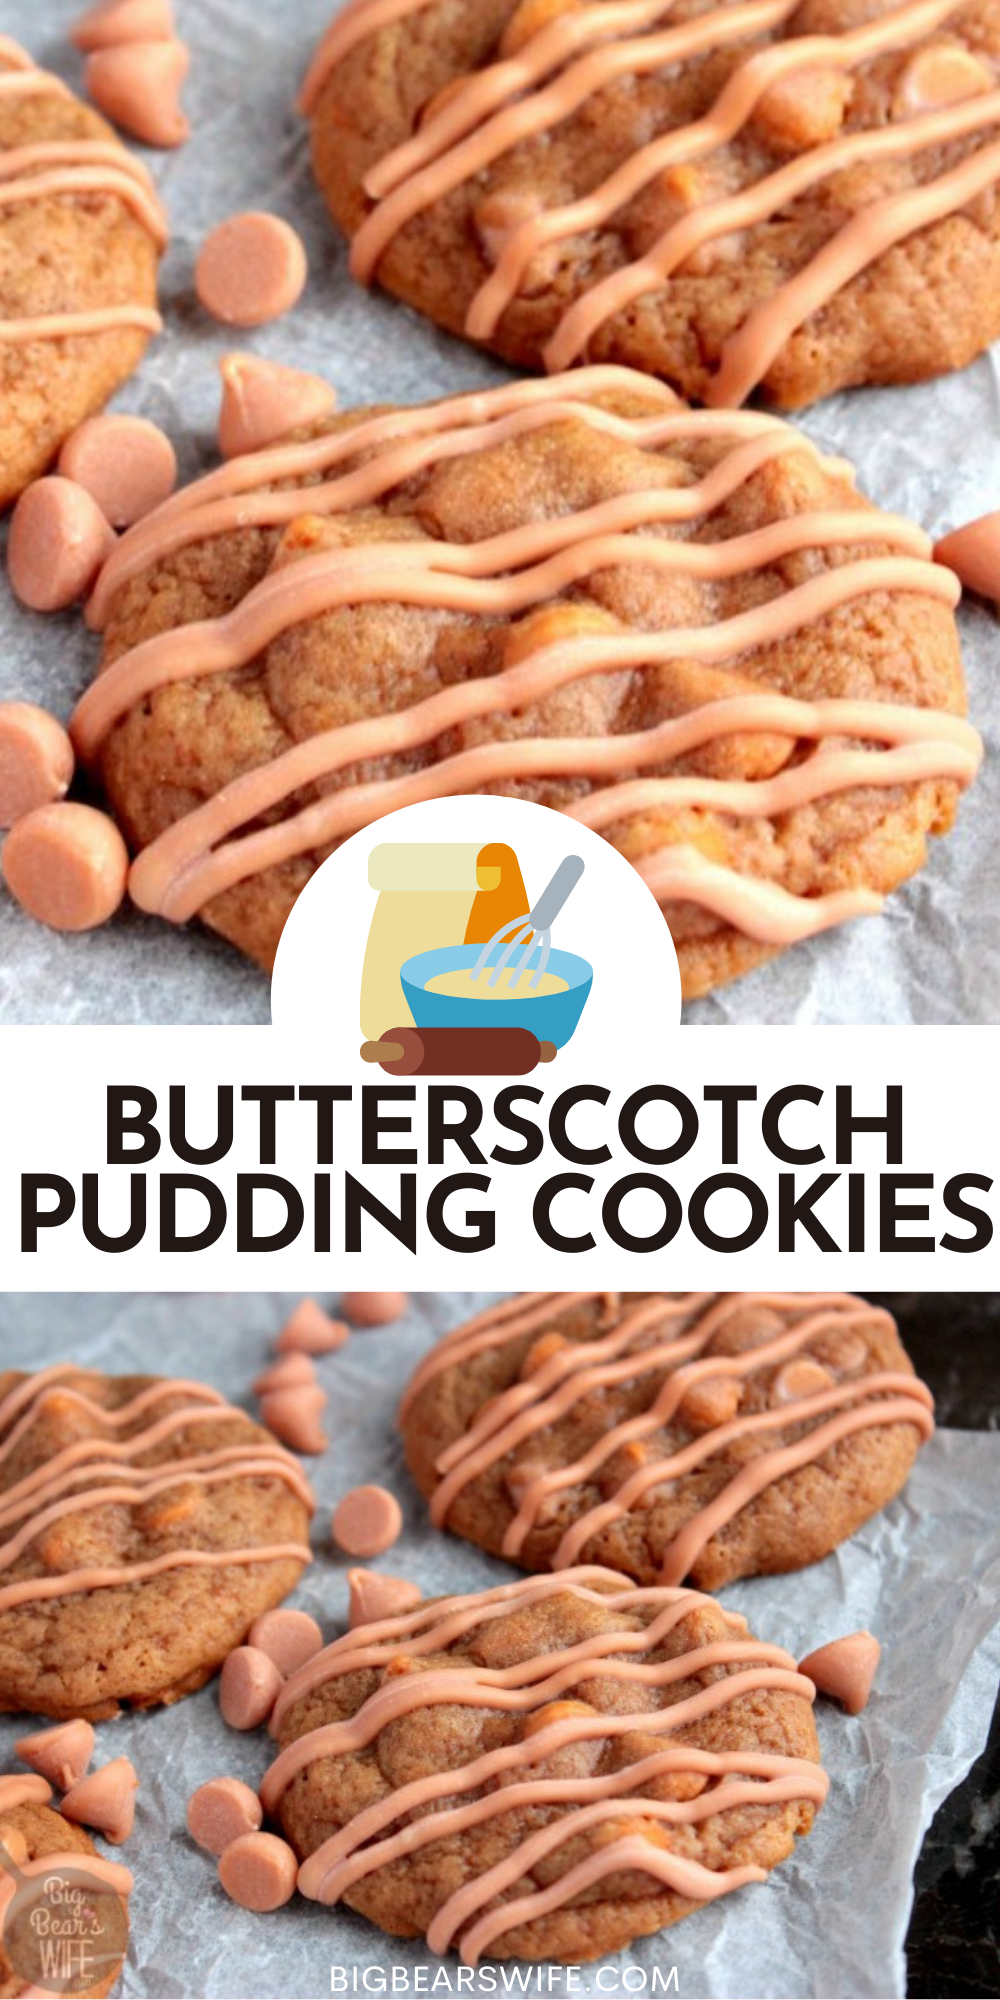 Butterscotch Pudding cookies are made from scratch with butterscotch pudding mixed right into the batter to make them super soft and chewy! via @bigbearswife